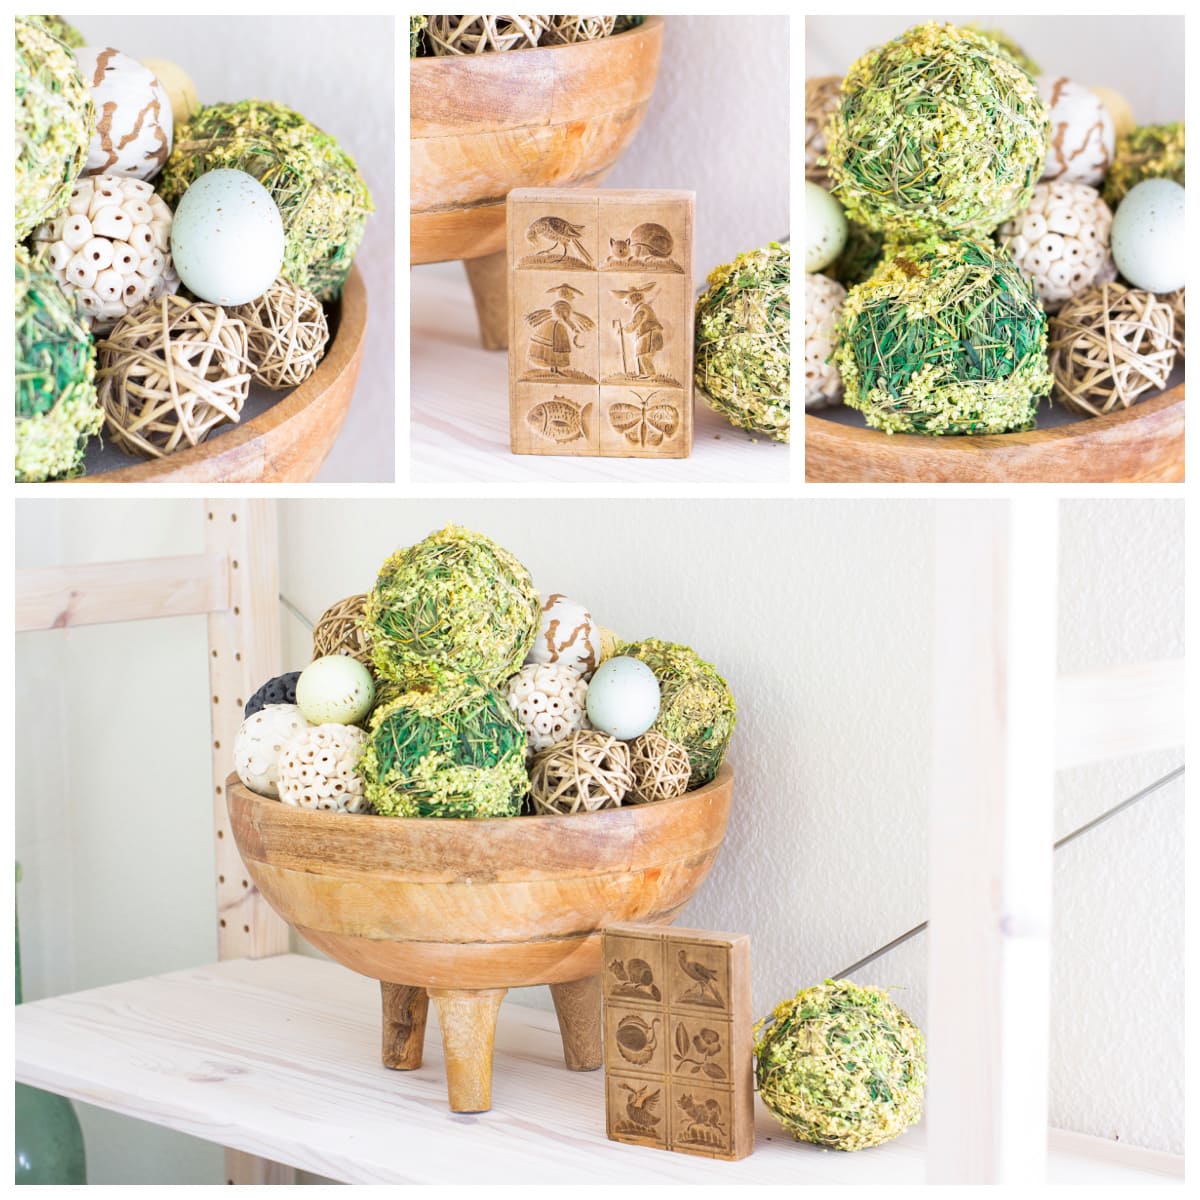 apartment living room spring decor wooden pedestal bowl with moss balls and eggs on shelf collage